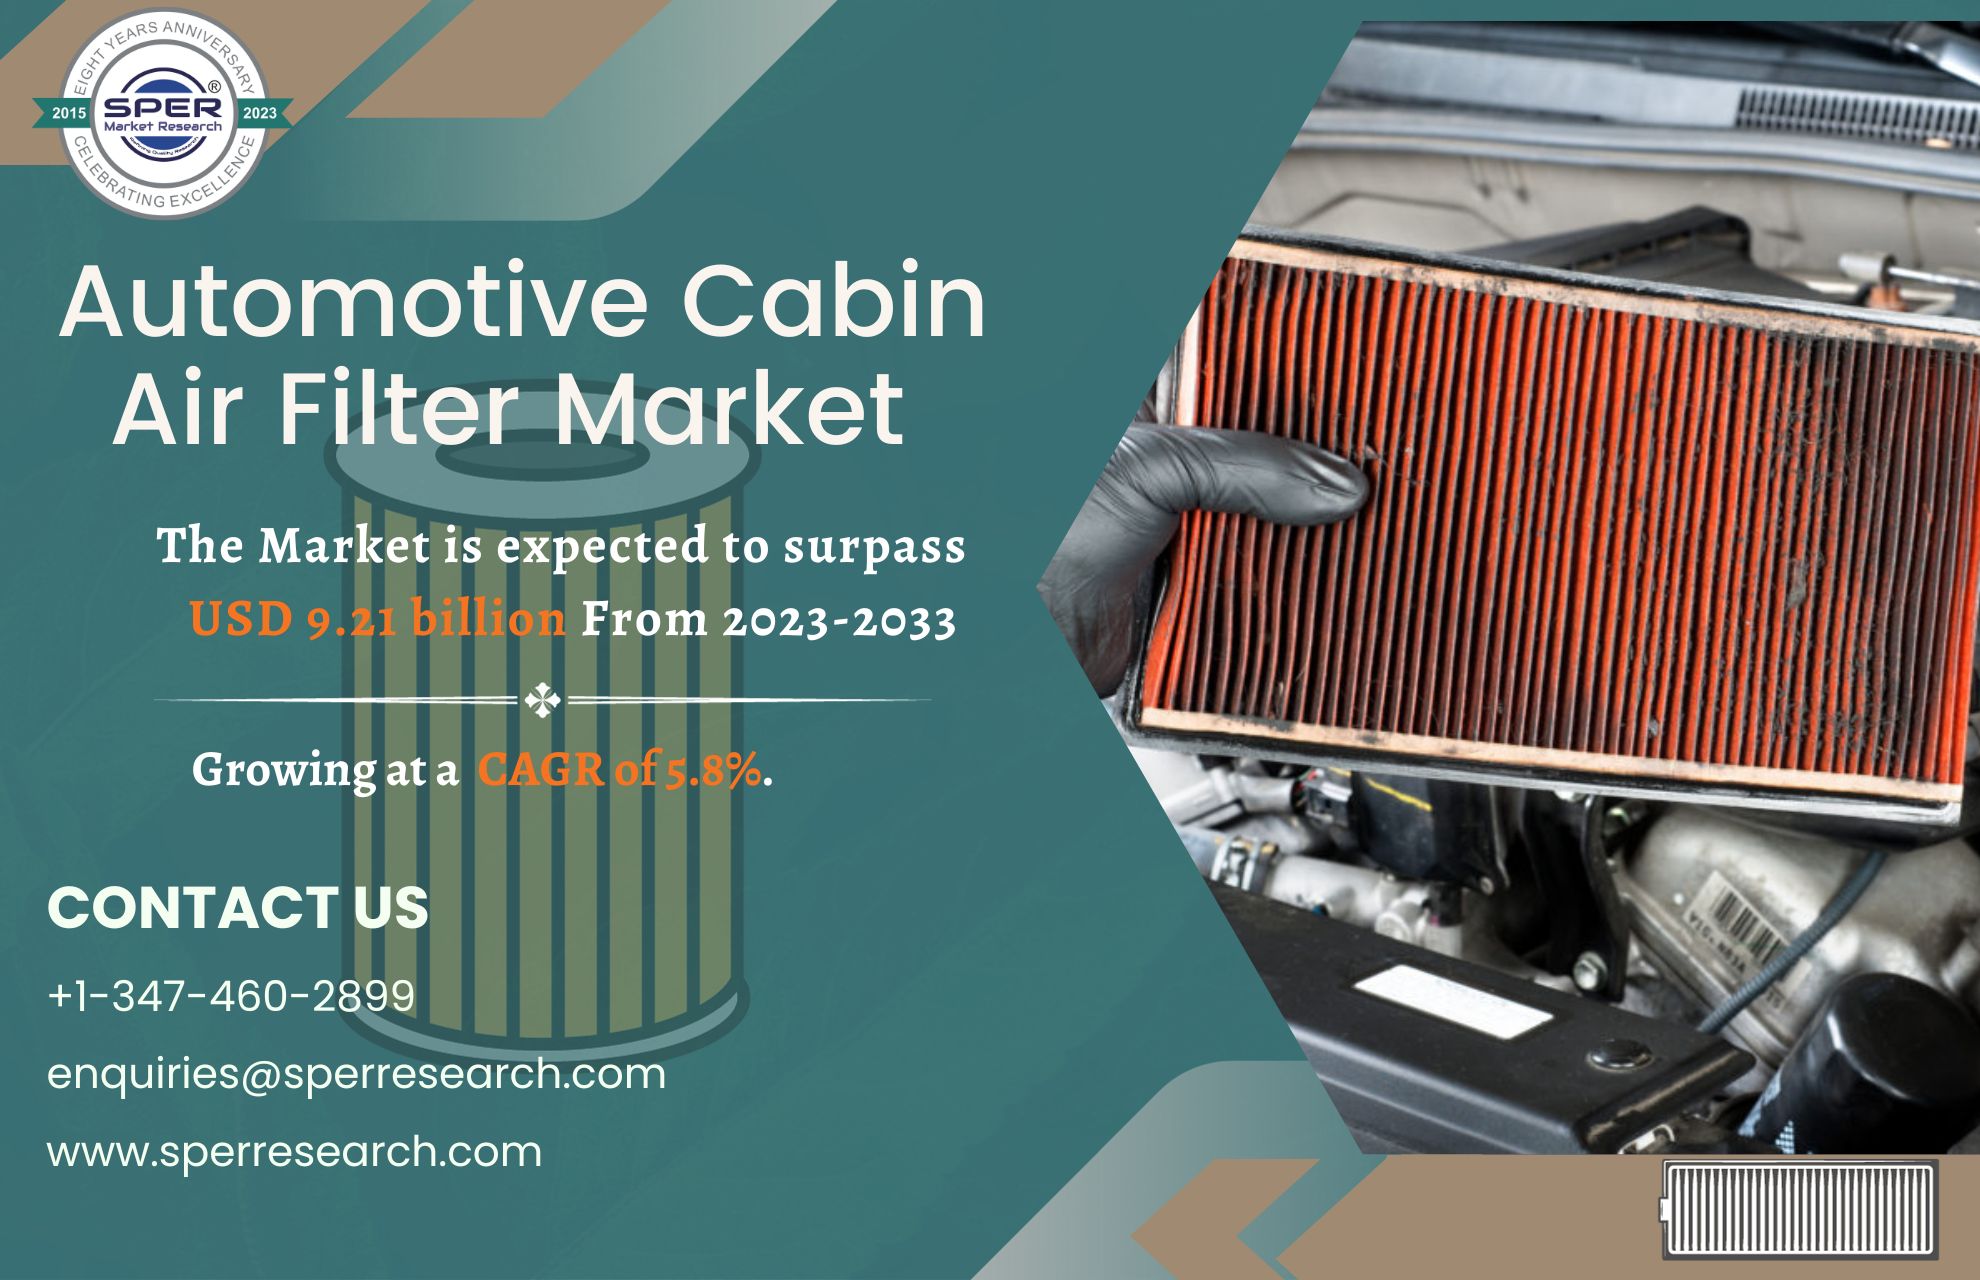 Automotive Cabin Air Filter Market Share, Revenue, Upcoming Trends, Growth Drivers, Business Challenges and Future Investment Opportunities Report 2033: SPER Market Research